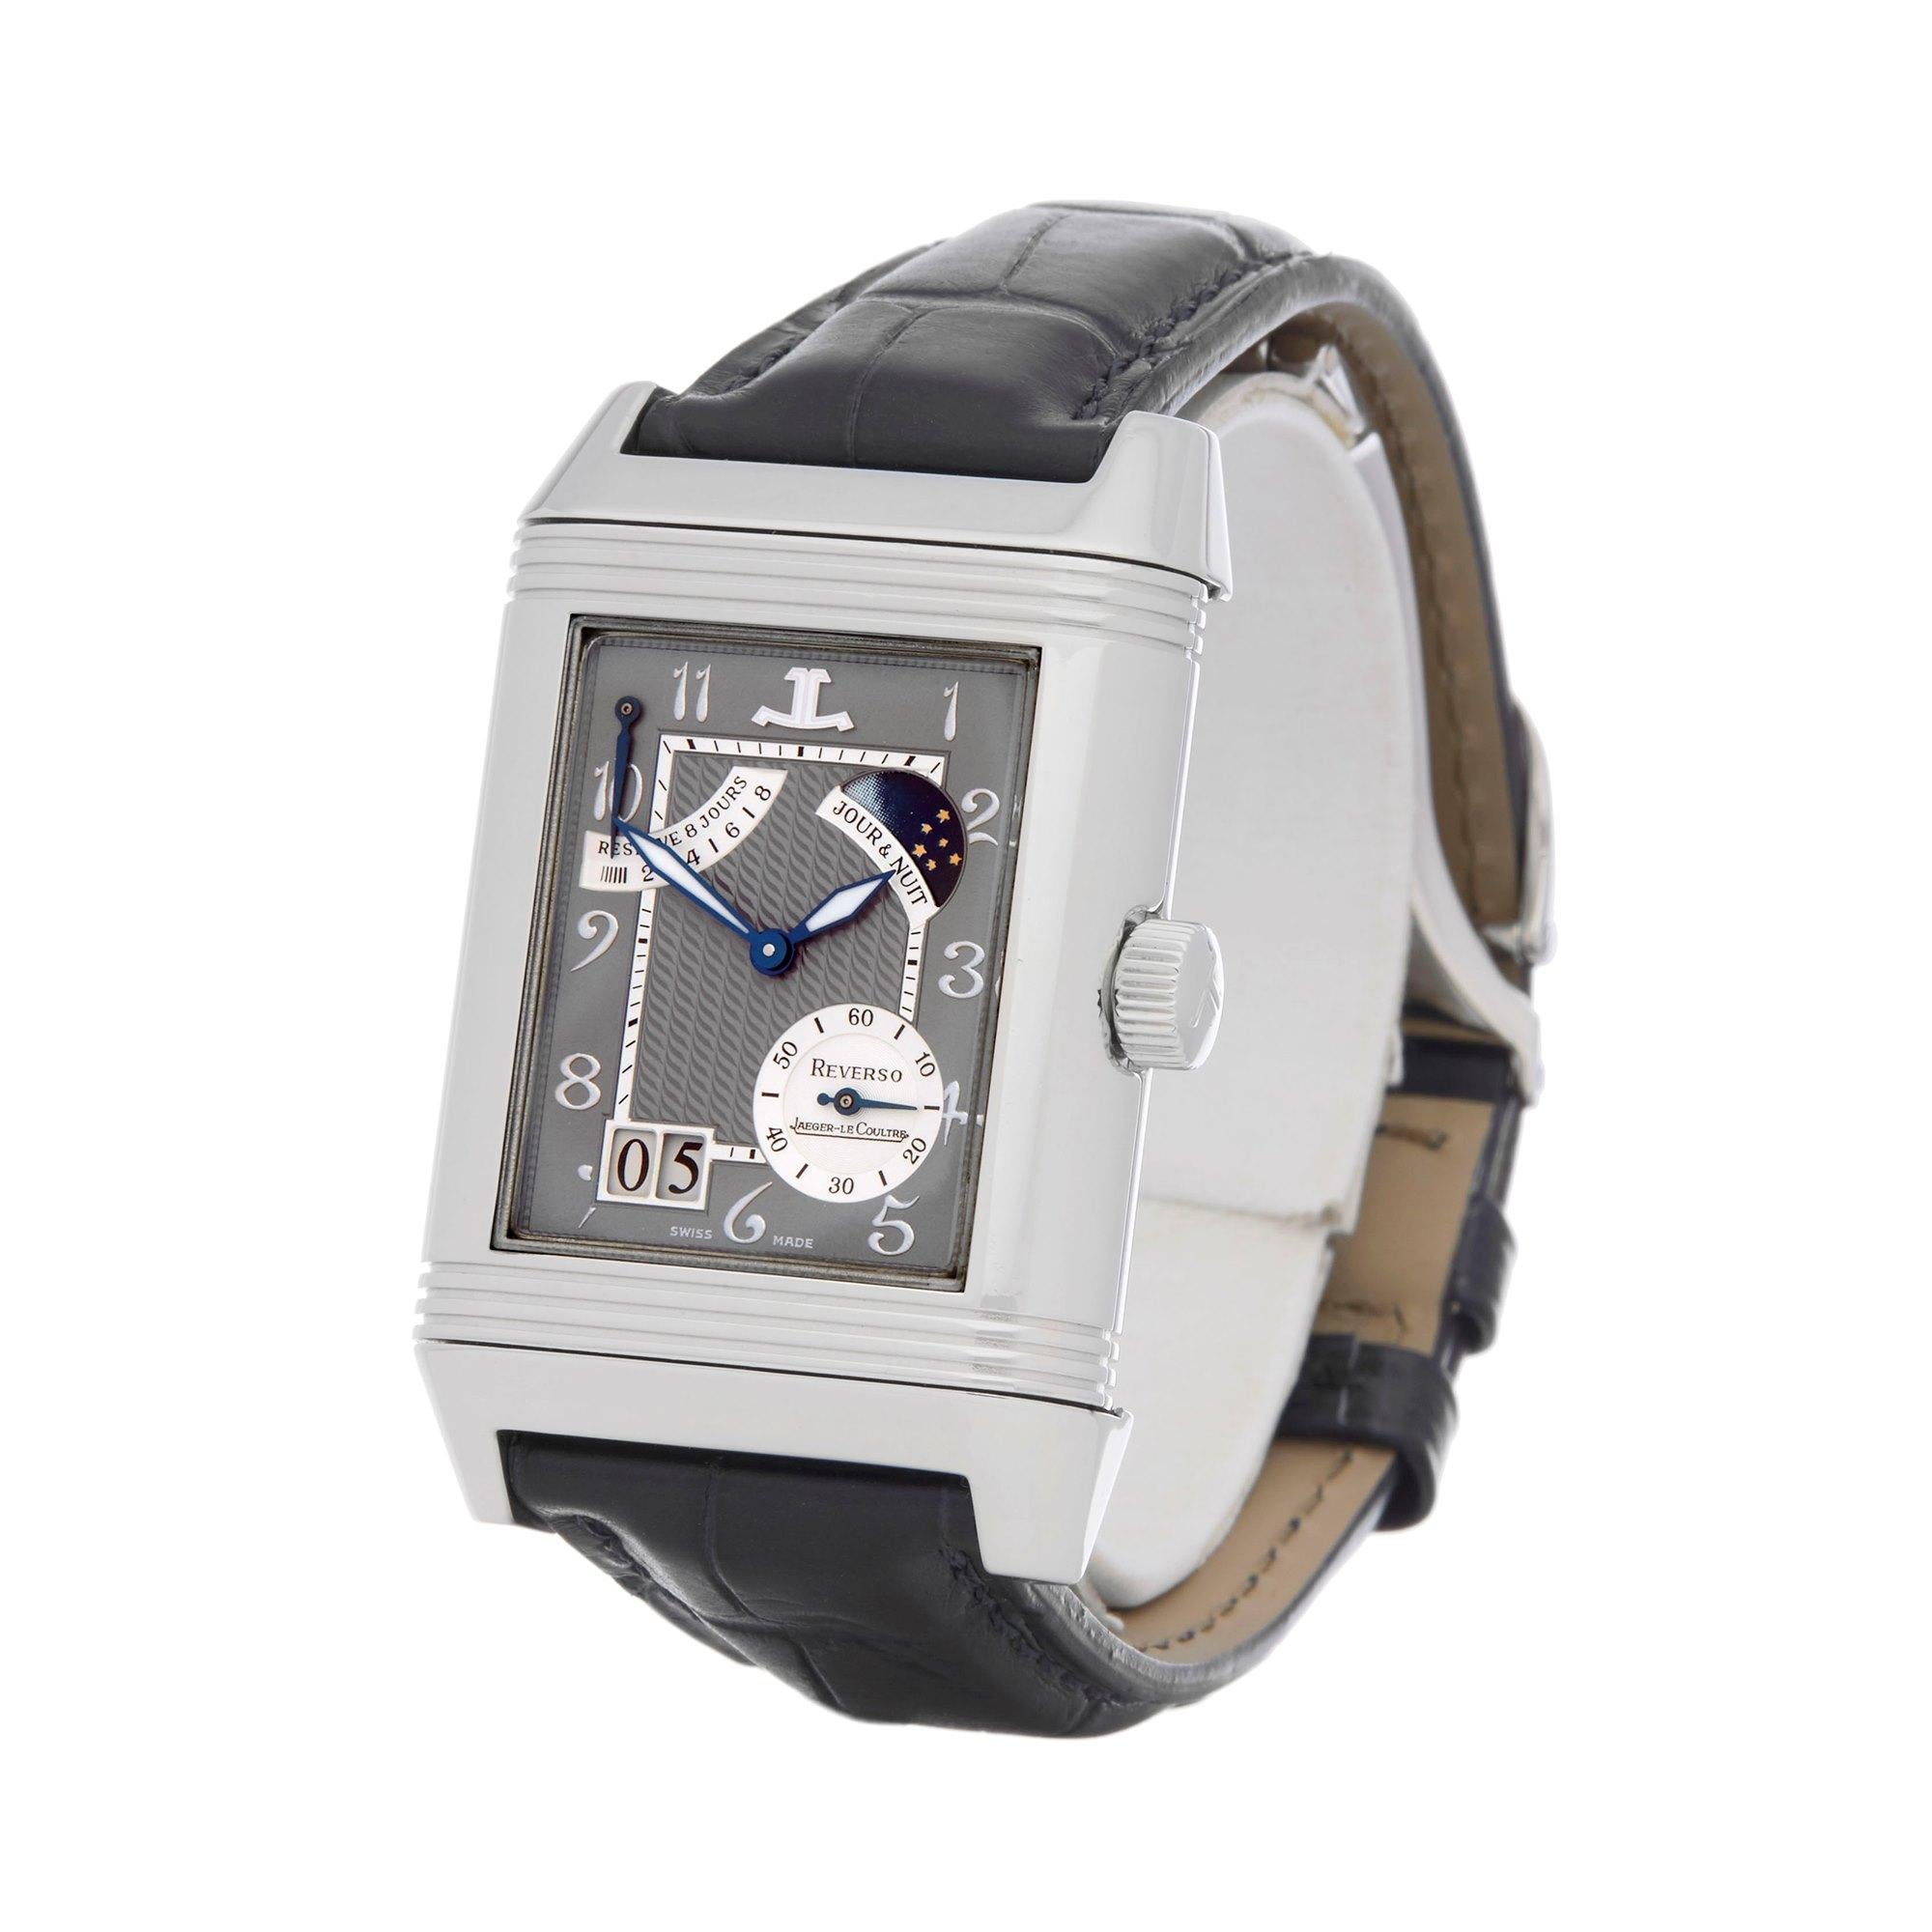 Xupes Reference: W007717
Manufacturer: Jaeger-LeCoultre
Model: Reverso
Model Variant: SEPTANTIEME
Model Number: Q3006420
Age: 12-10-2006
Gender: Men
Complete With: Jaeger- LeCoultre Box, Manuals & Guarantee
Dial: Grey Arabic
Glass: Sapphire